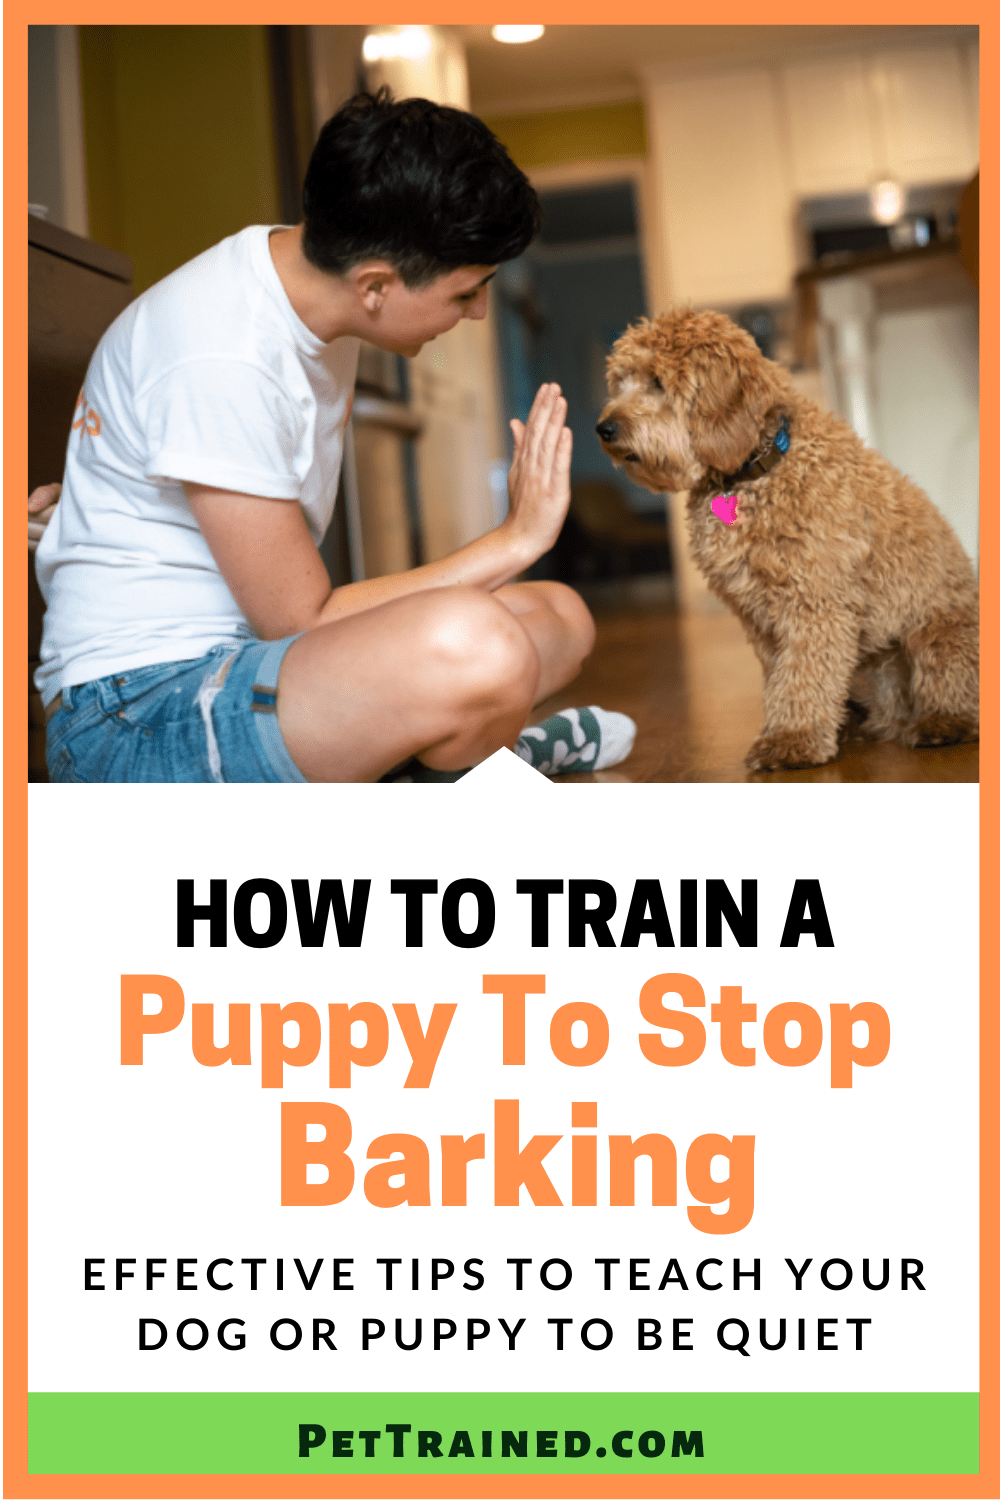 How To Train A Puppy To Stop Barking Pet Trained